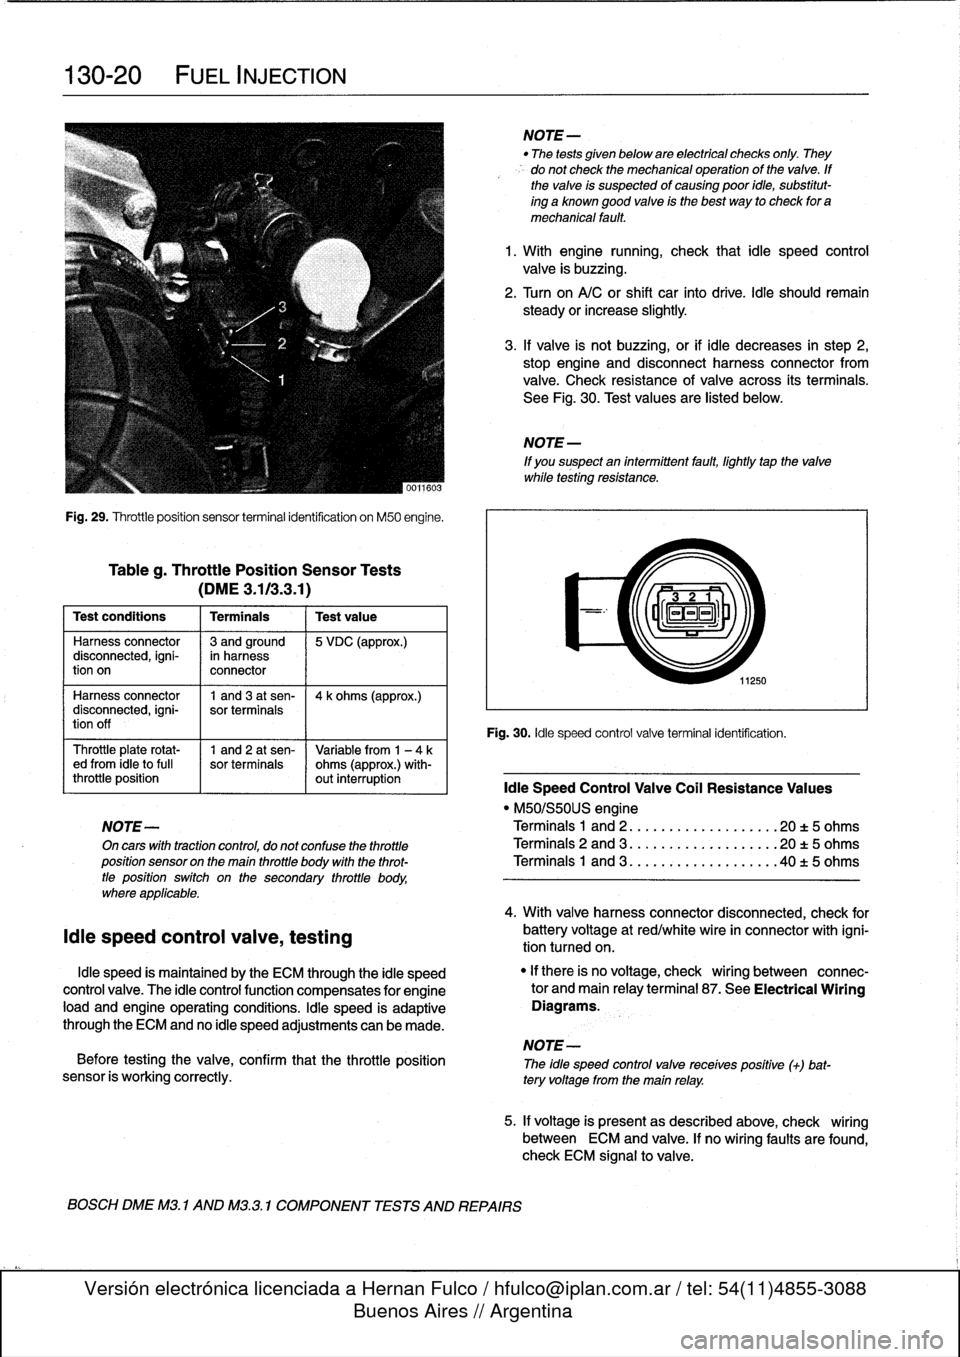 BMW 323i 1995 E36 Workshop Manual 
130-20

	

FUEL
INJECTION

Fig
.
29
.
Throttleposition
sensor
terminal
identification
on
M50
engine
.

Tableg
.
Throttle
Position
Sensor
Tests

(DME3
.113
.3
.1)

Test
conditions

	

I
Terminals

	

